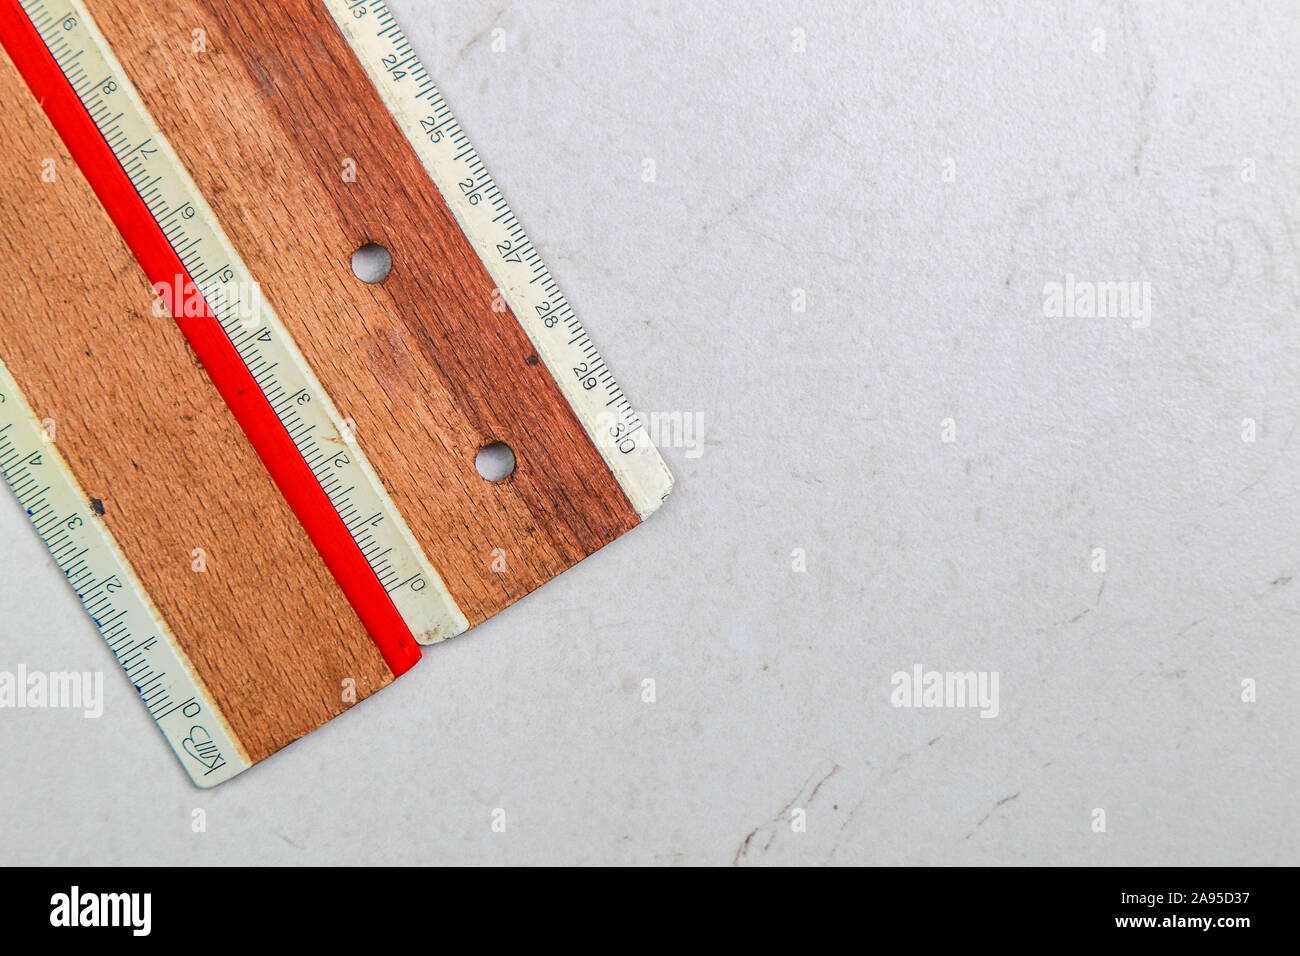 wooden rulers on a white background Stock Photo